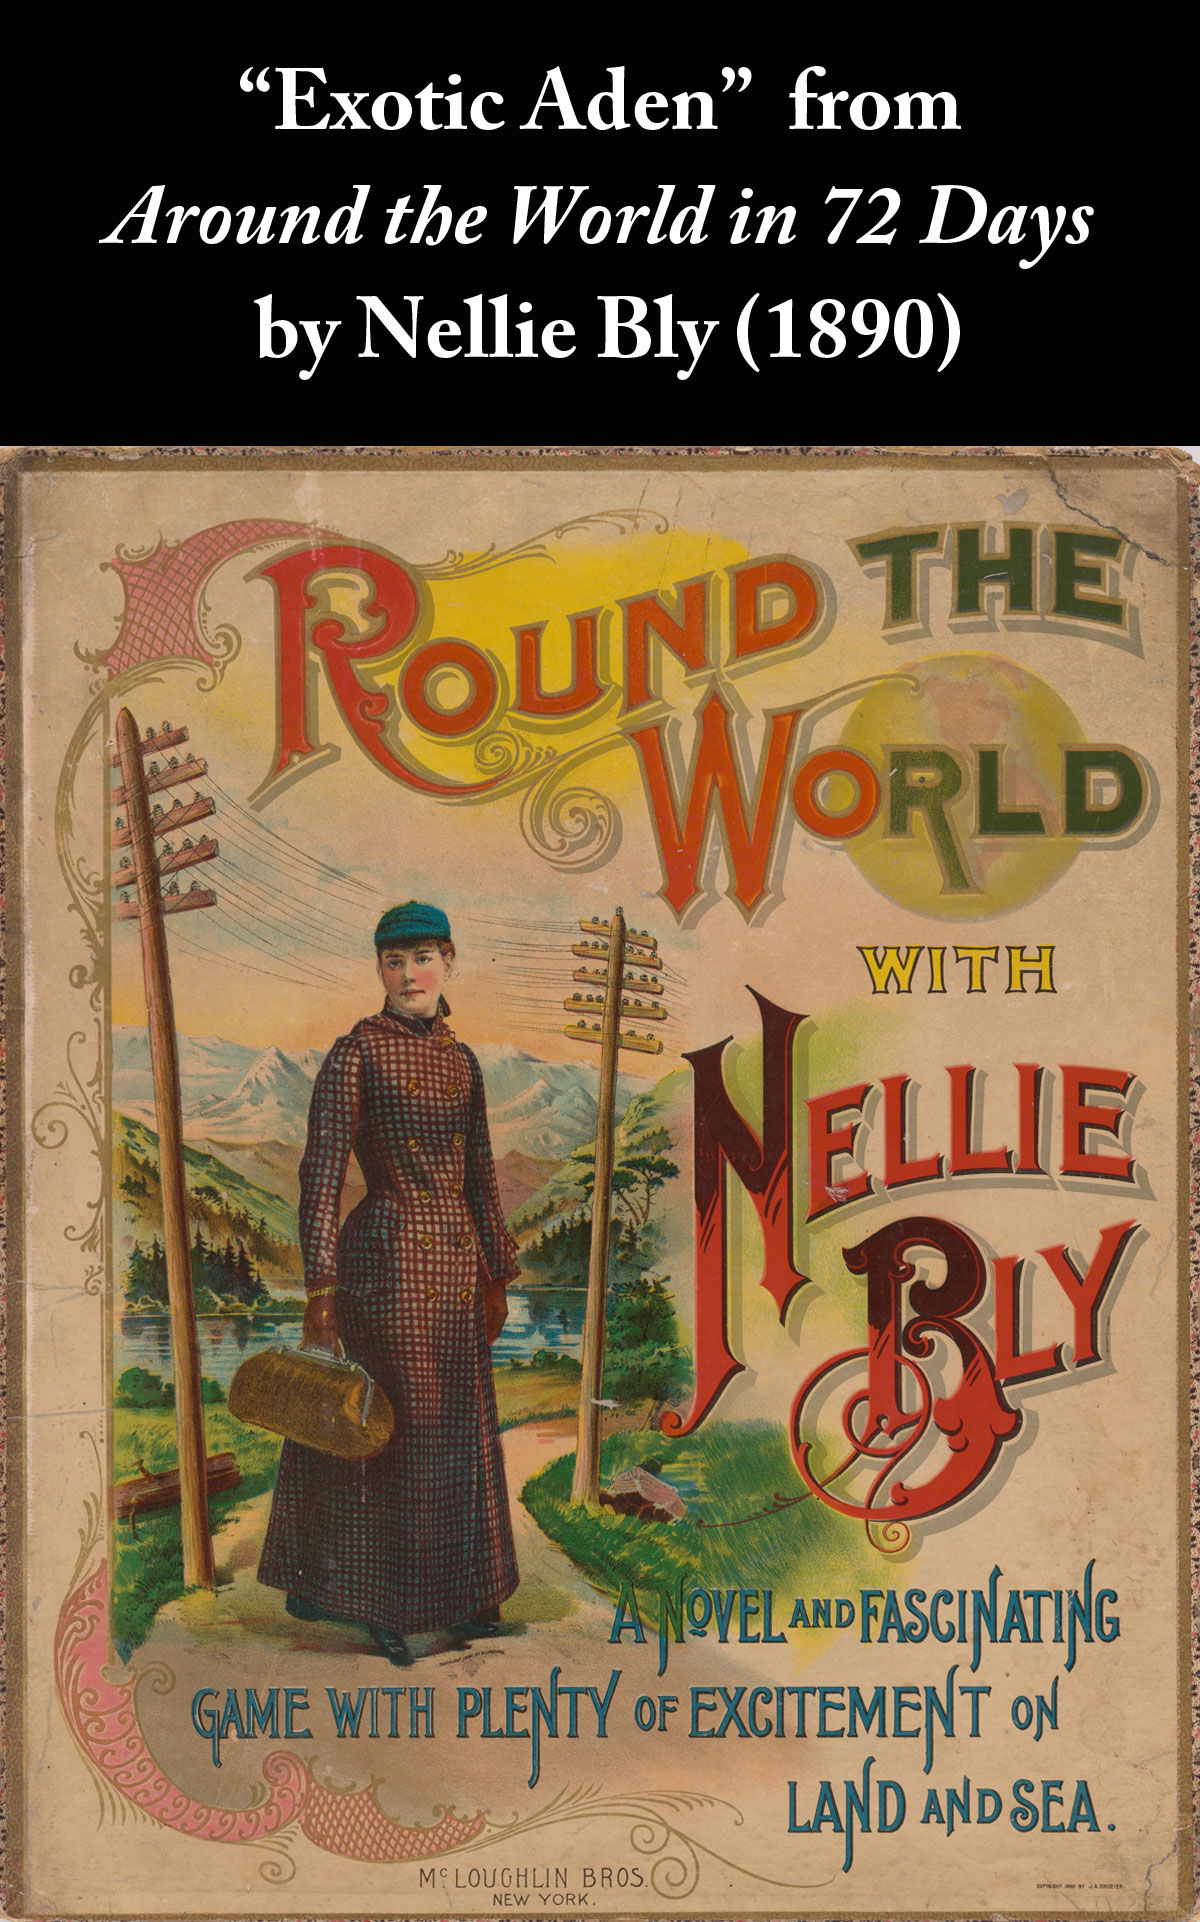 Exotic Aden from Around the World in Seventy-Two Days by Nellie Bly (1890)